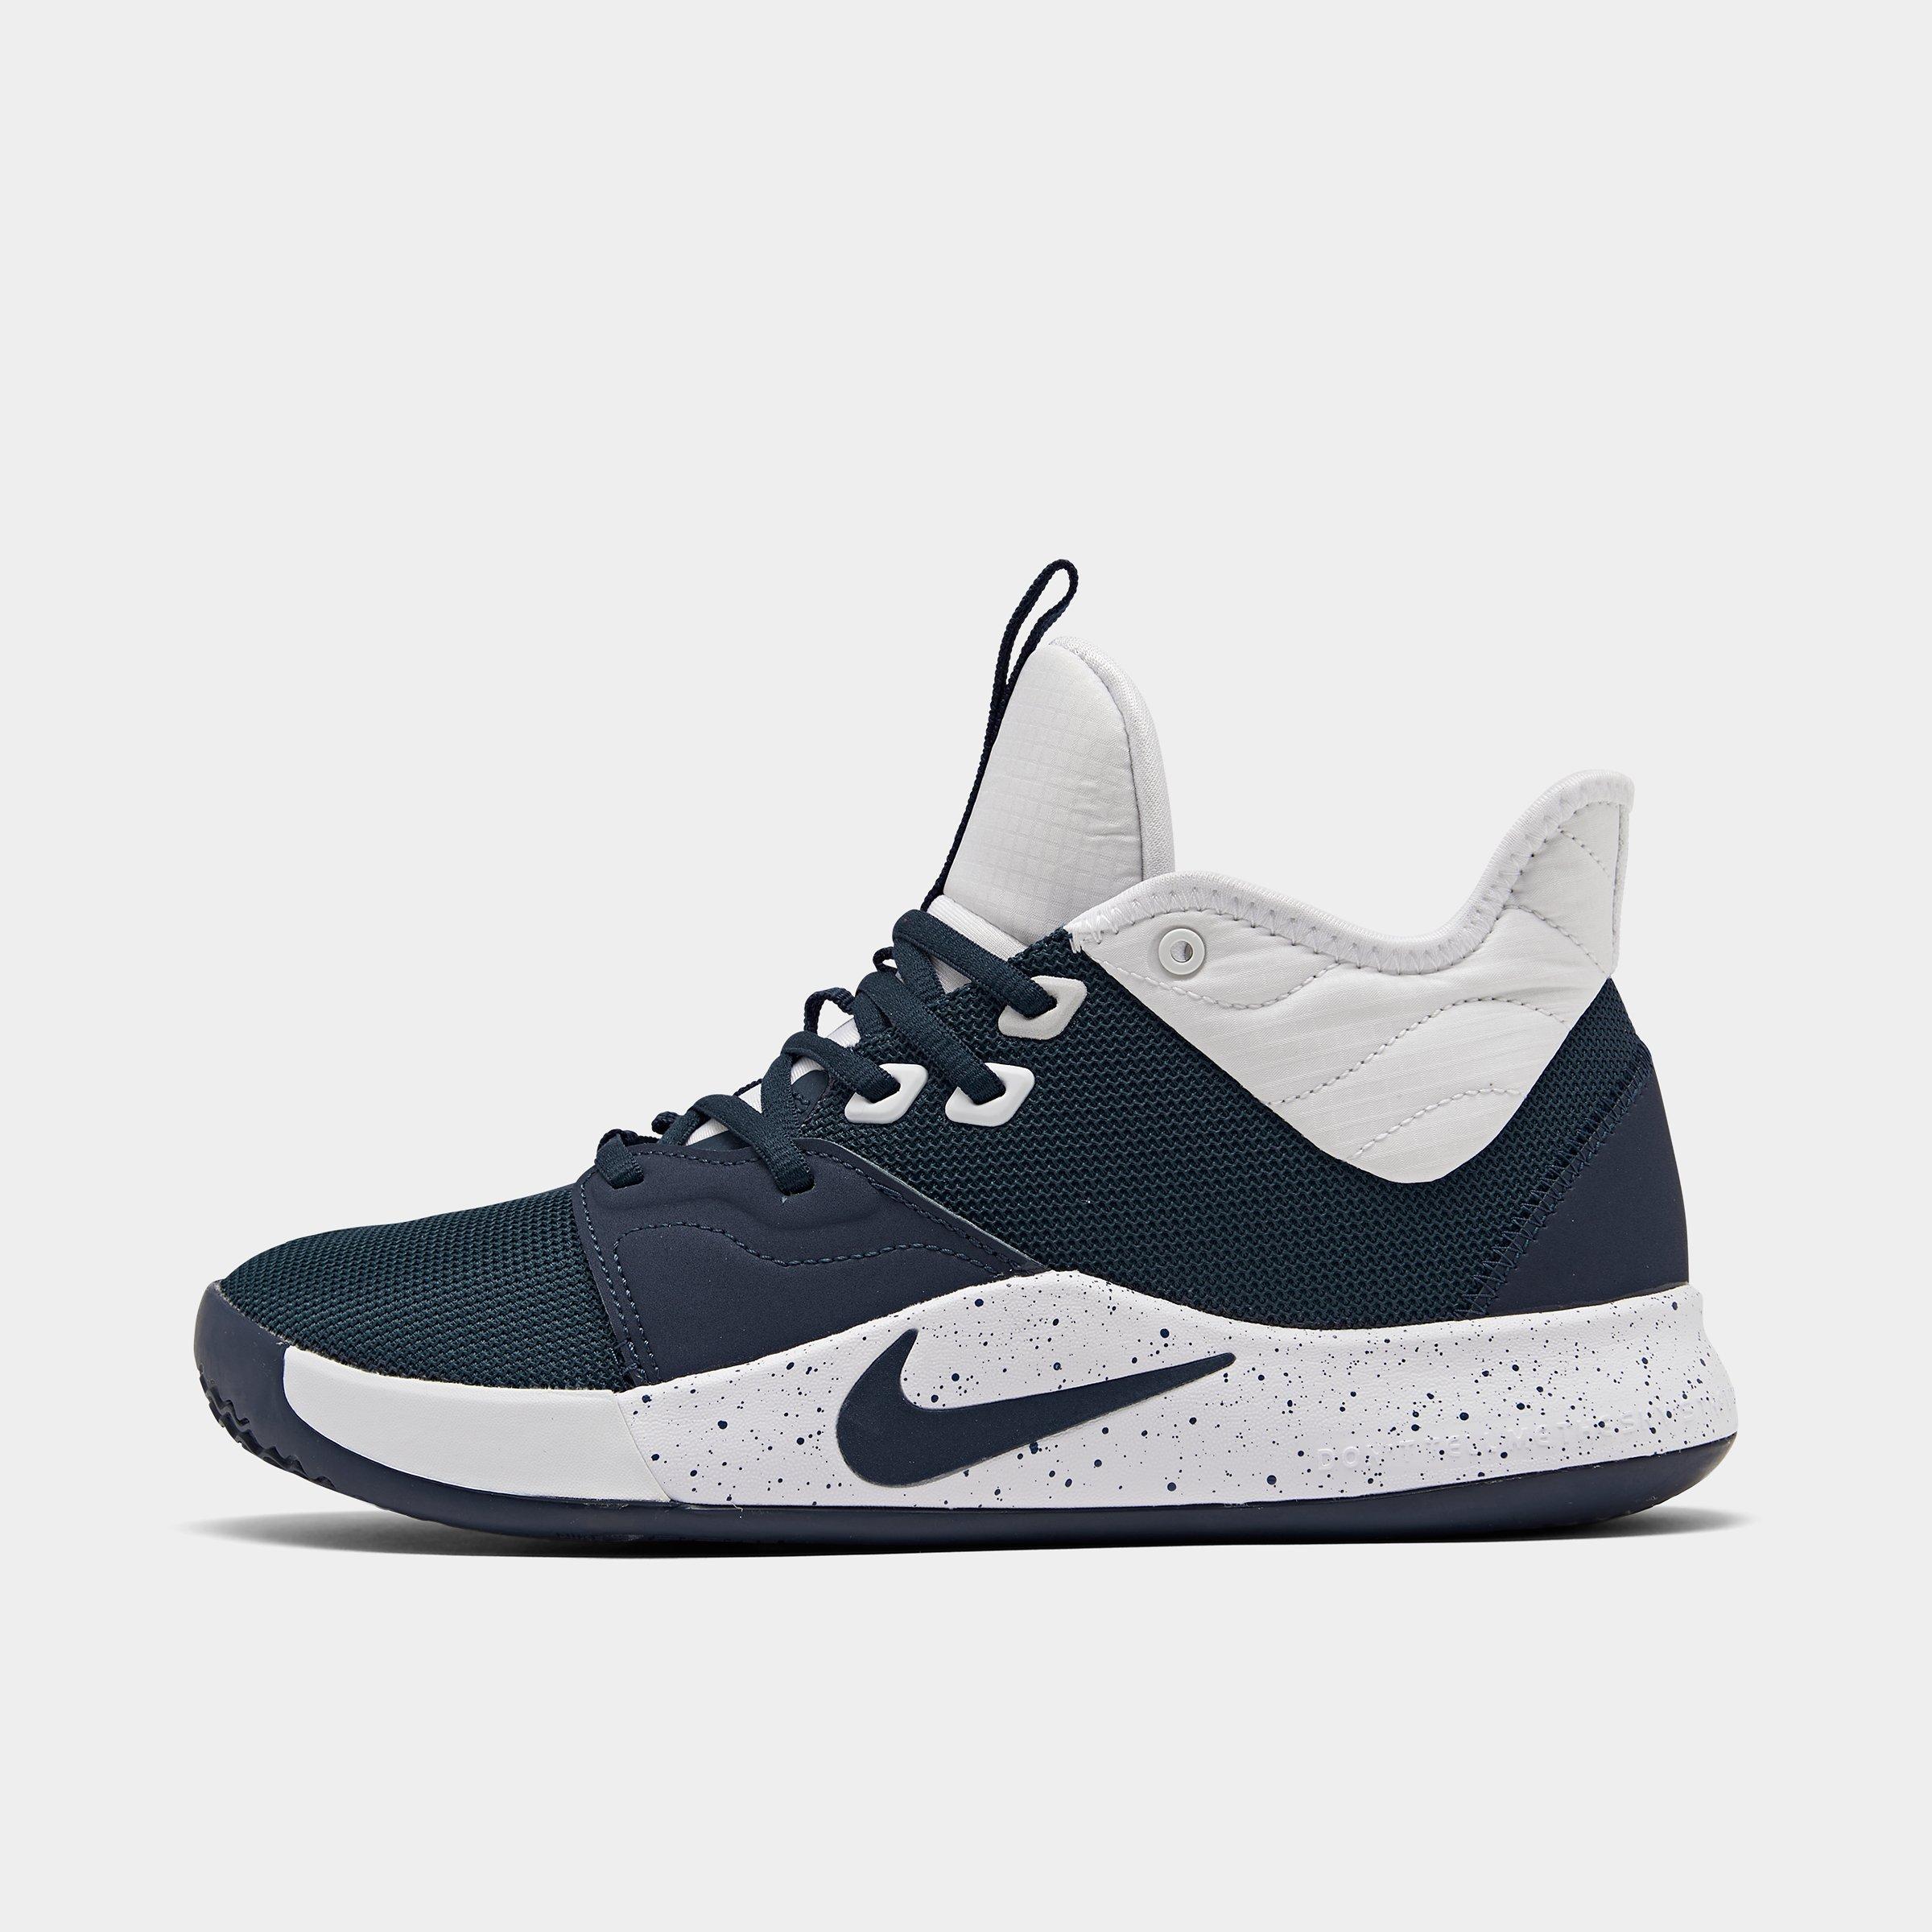 pg 3 womens basketball shoes